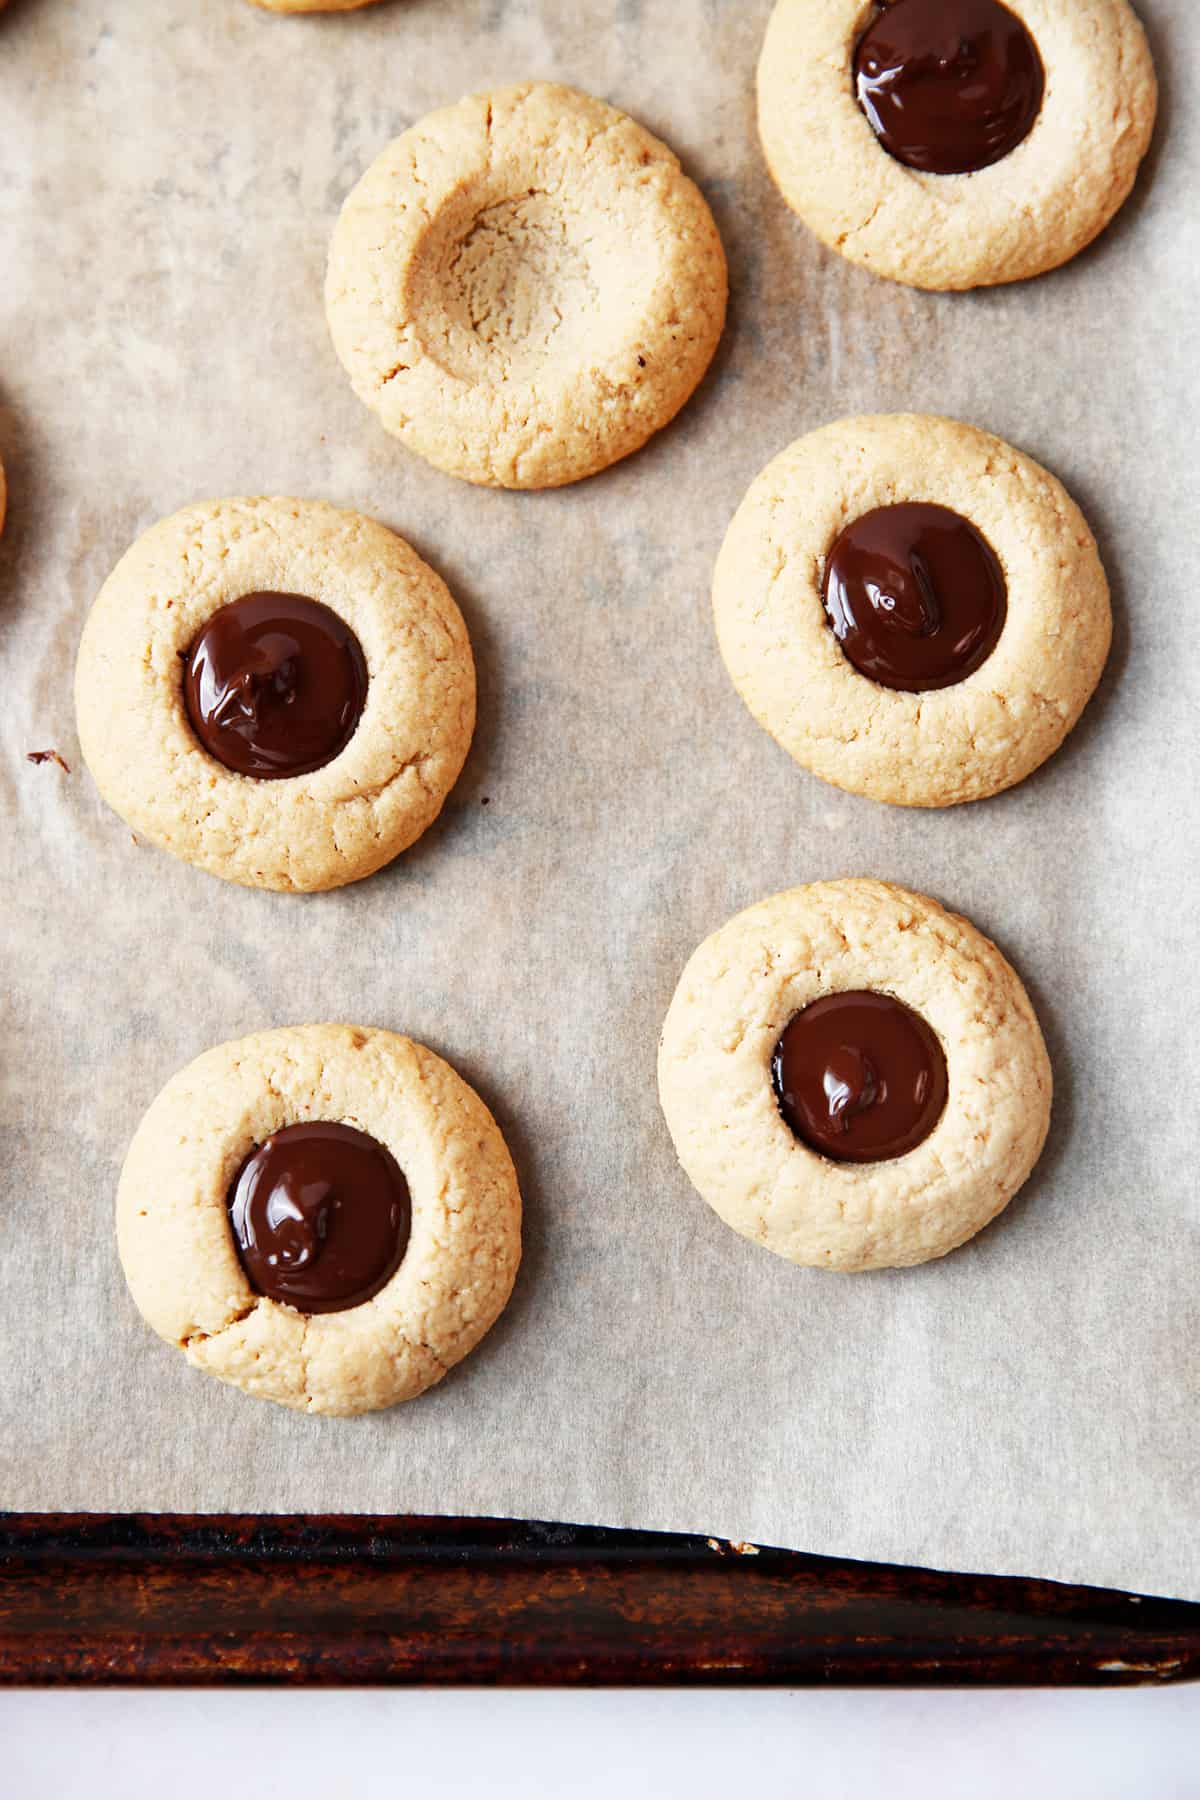 Gluten free peanut butter cookies with chocolate